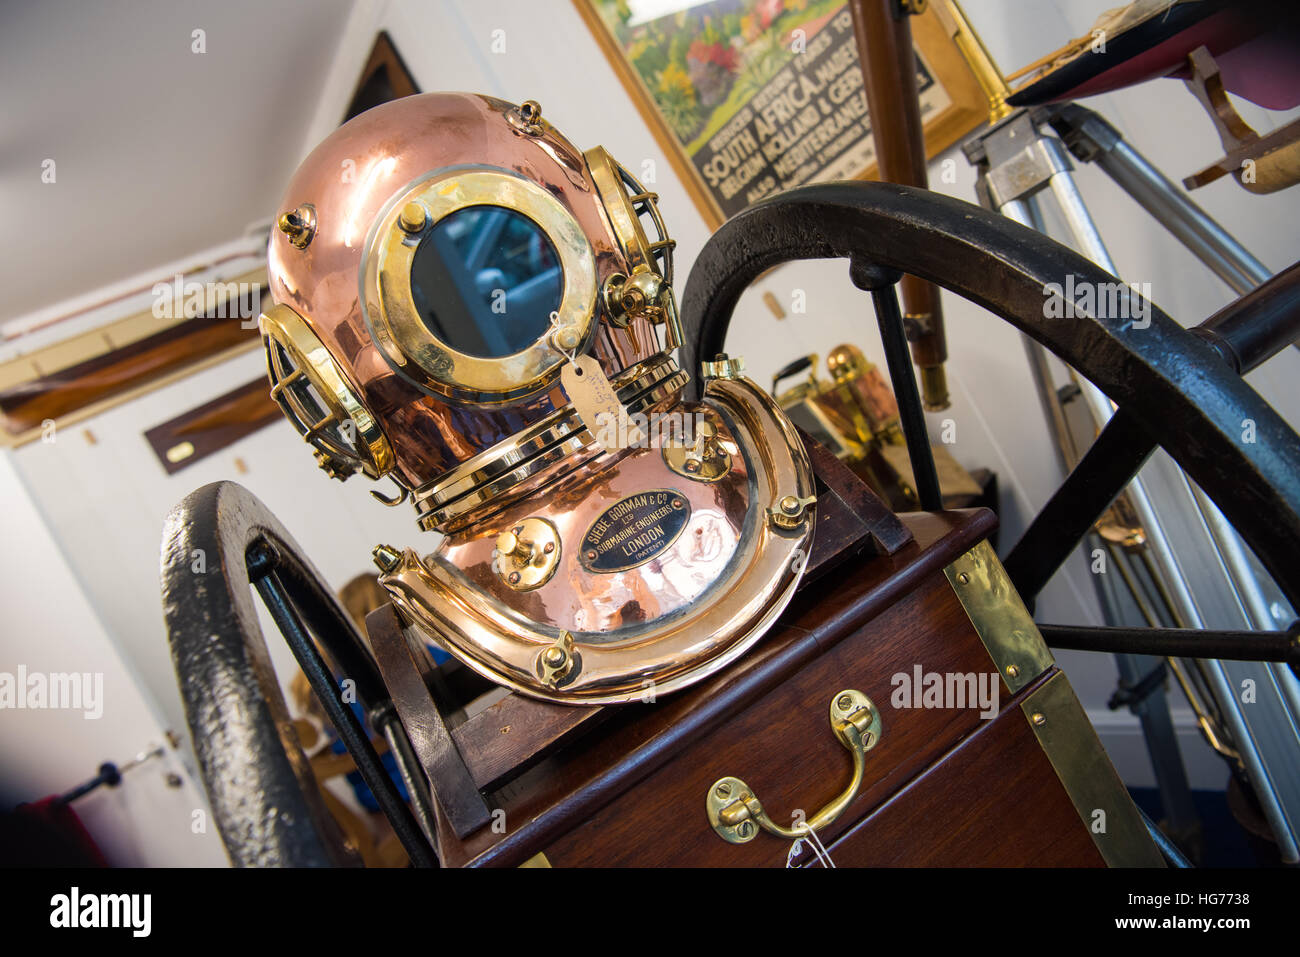 Vintage deep sea diving helmet in brass and copper and mechanical breathing apparatus on sale in an upmarket antique shop Stock Photo